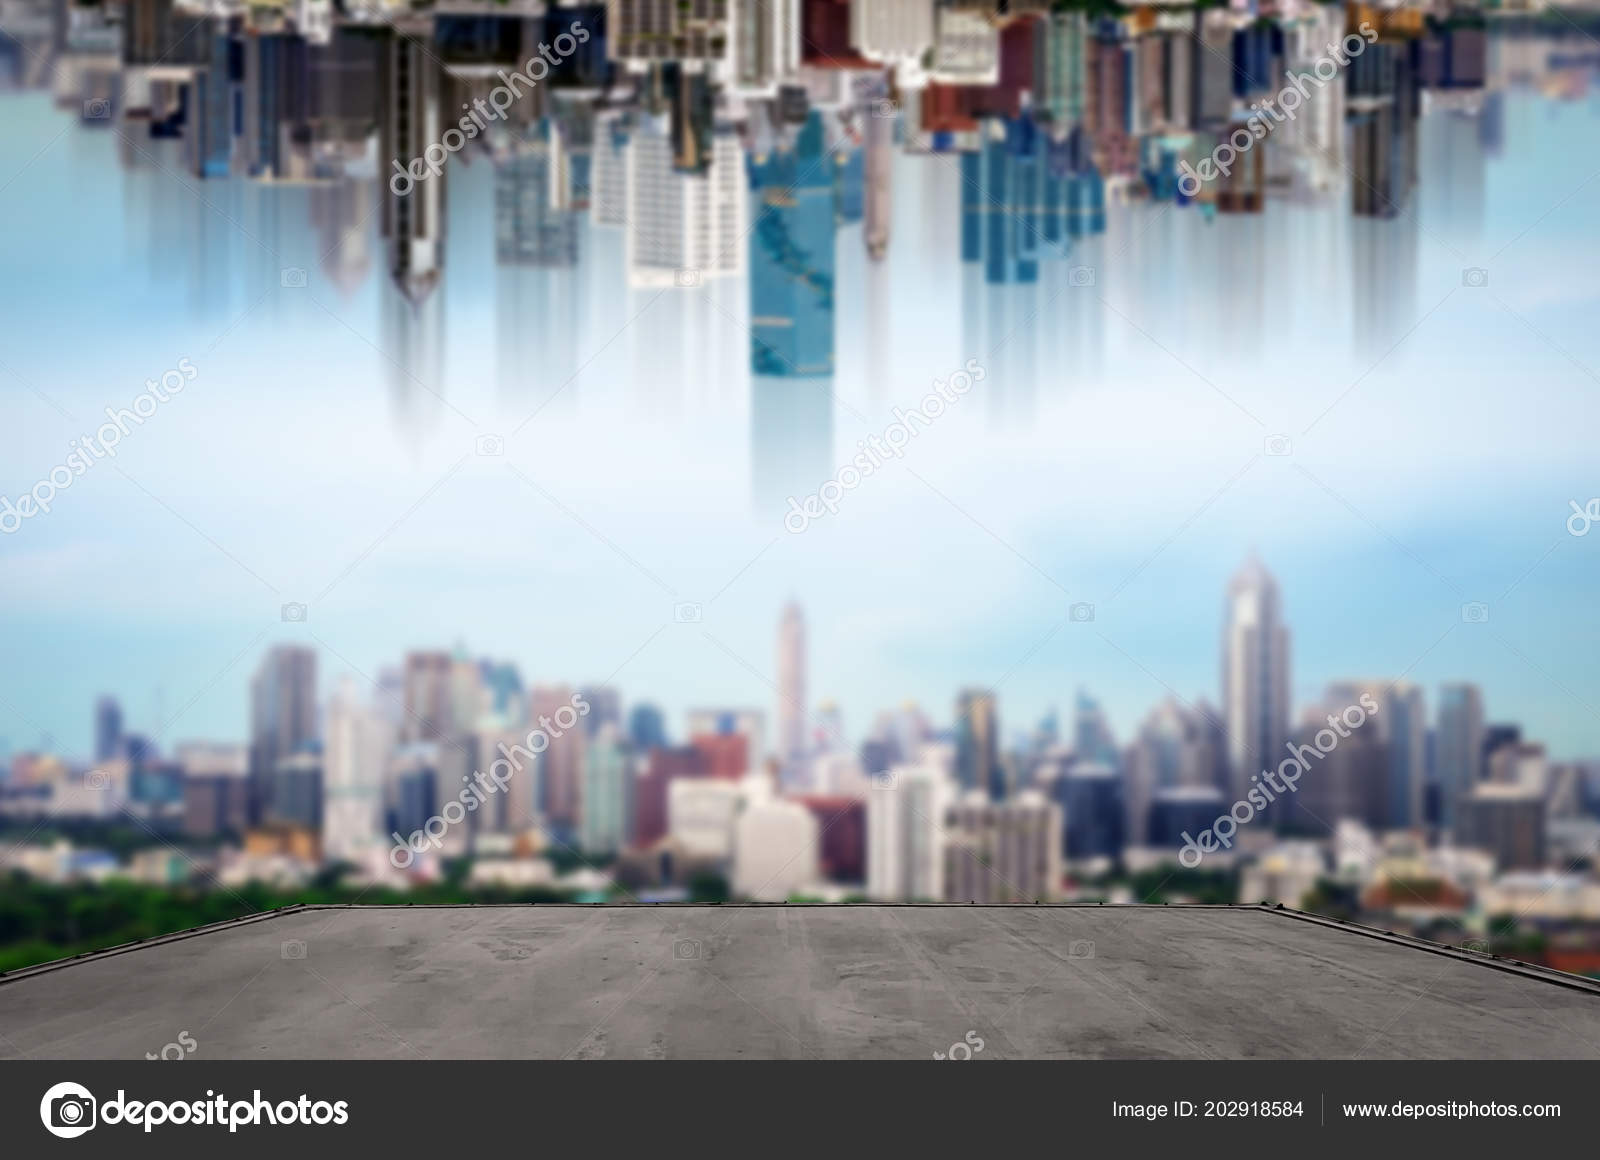 Roof Top Balcony Building Upside Cityscape Background Stock Photo by  ©nirutdps 202918584